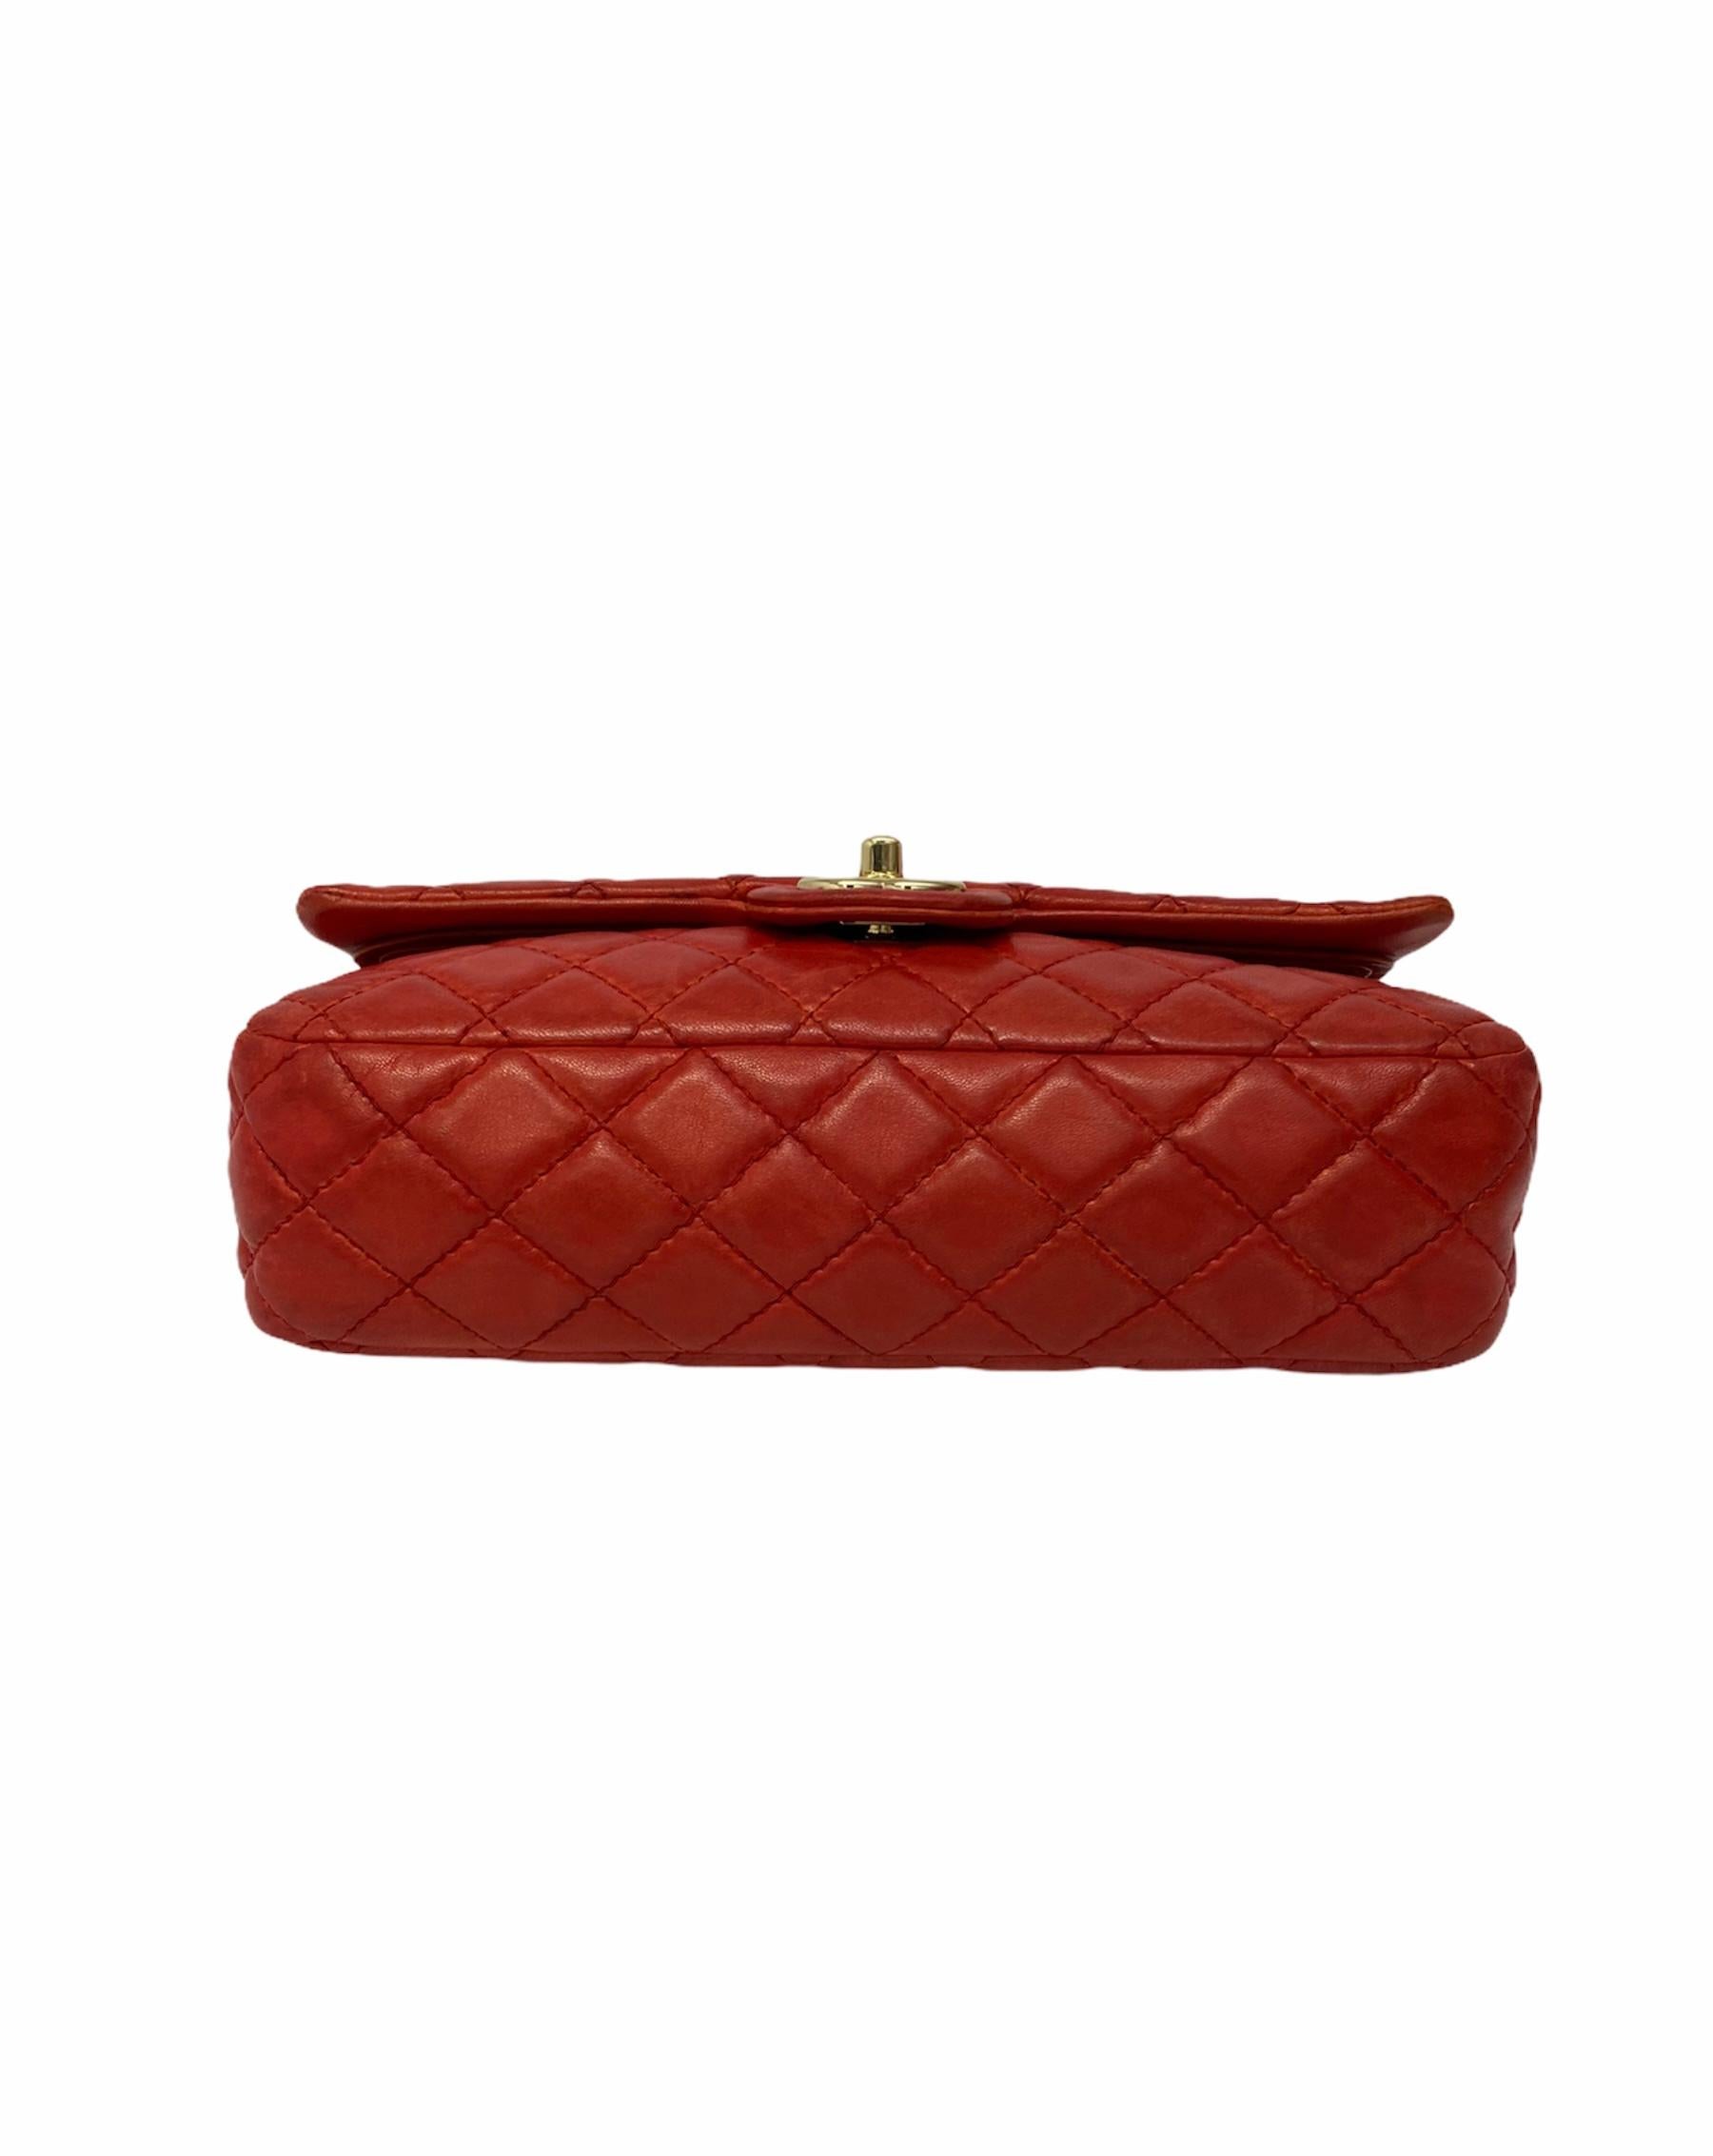 Chanel 2.55 Red Leather with Golden Hardware 1